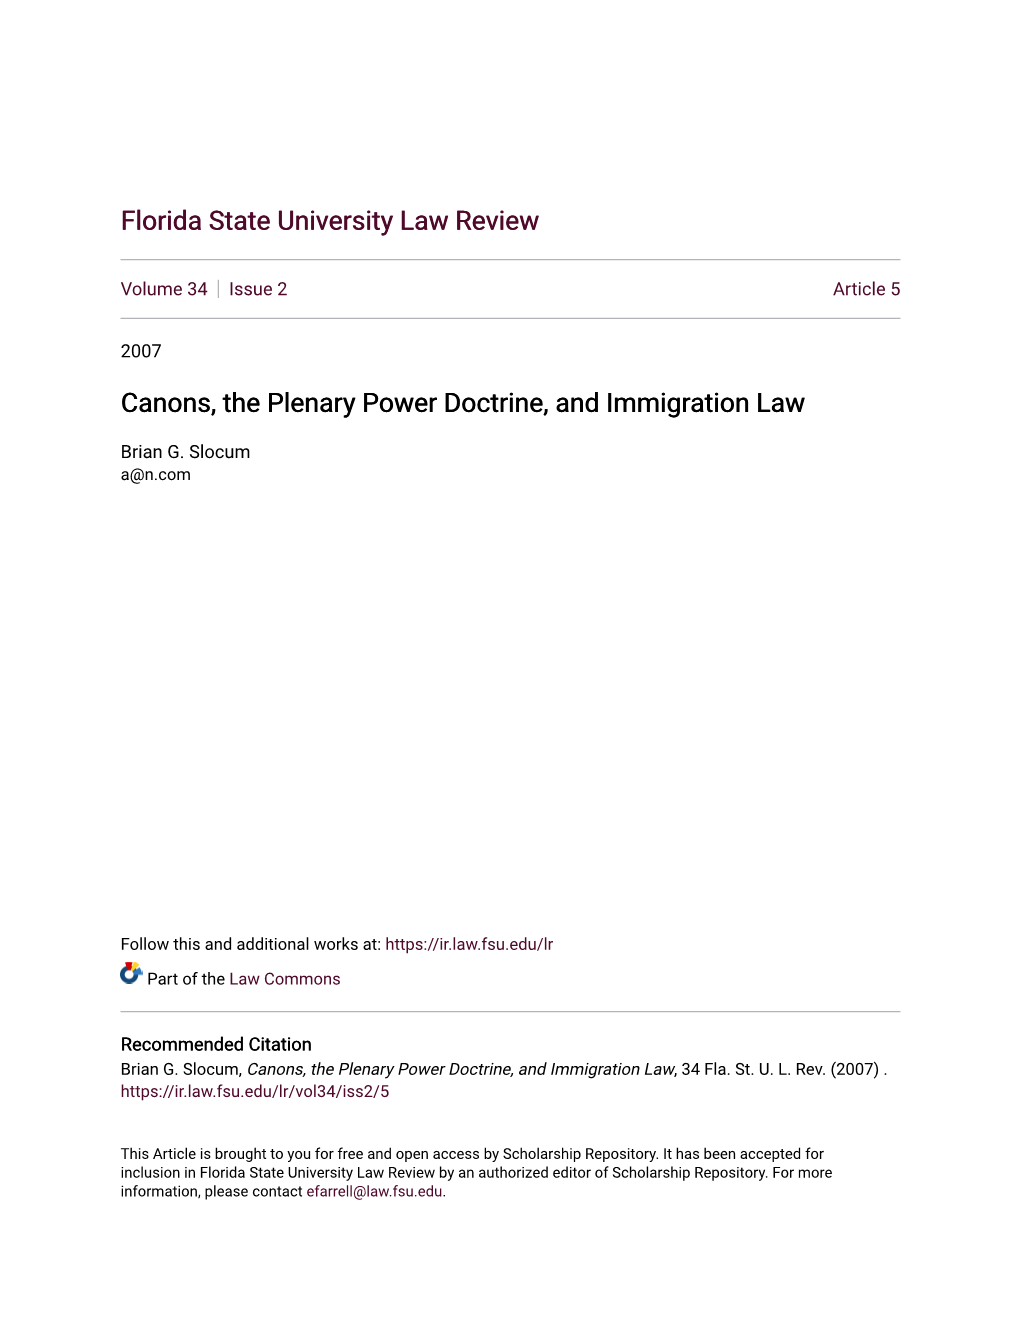 Canons, the Plenary Power Doctrine, and Immigration Law